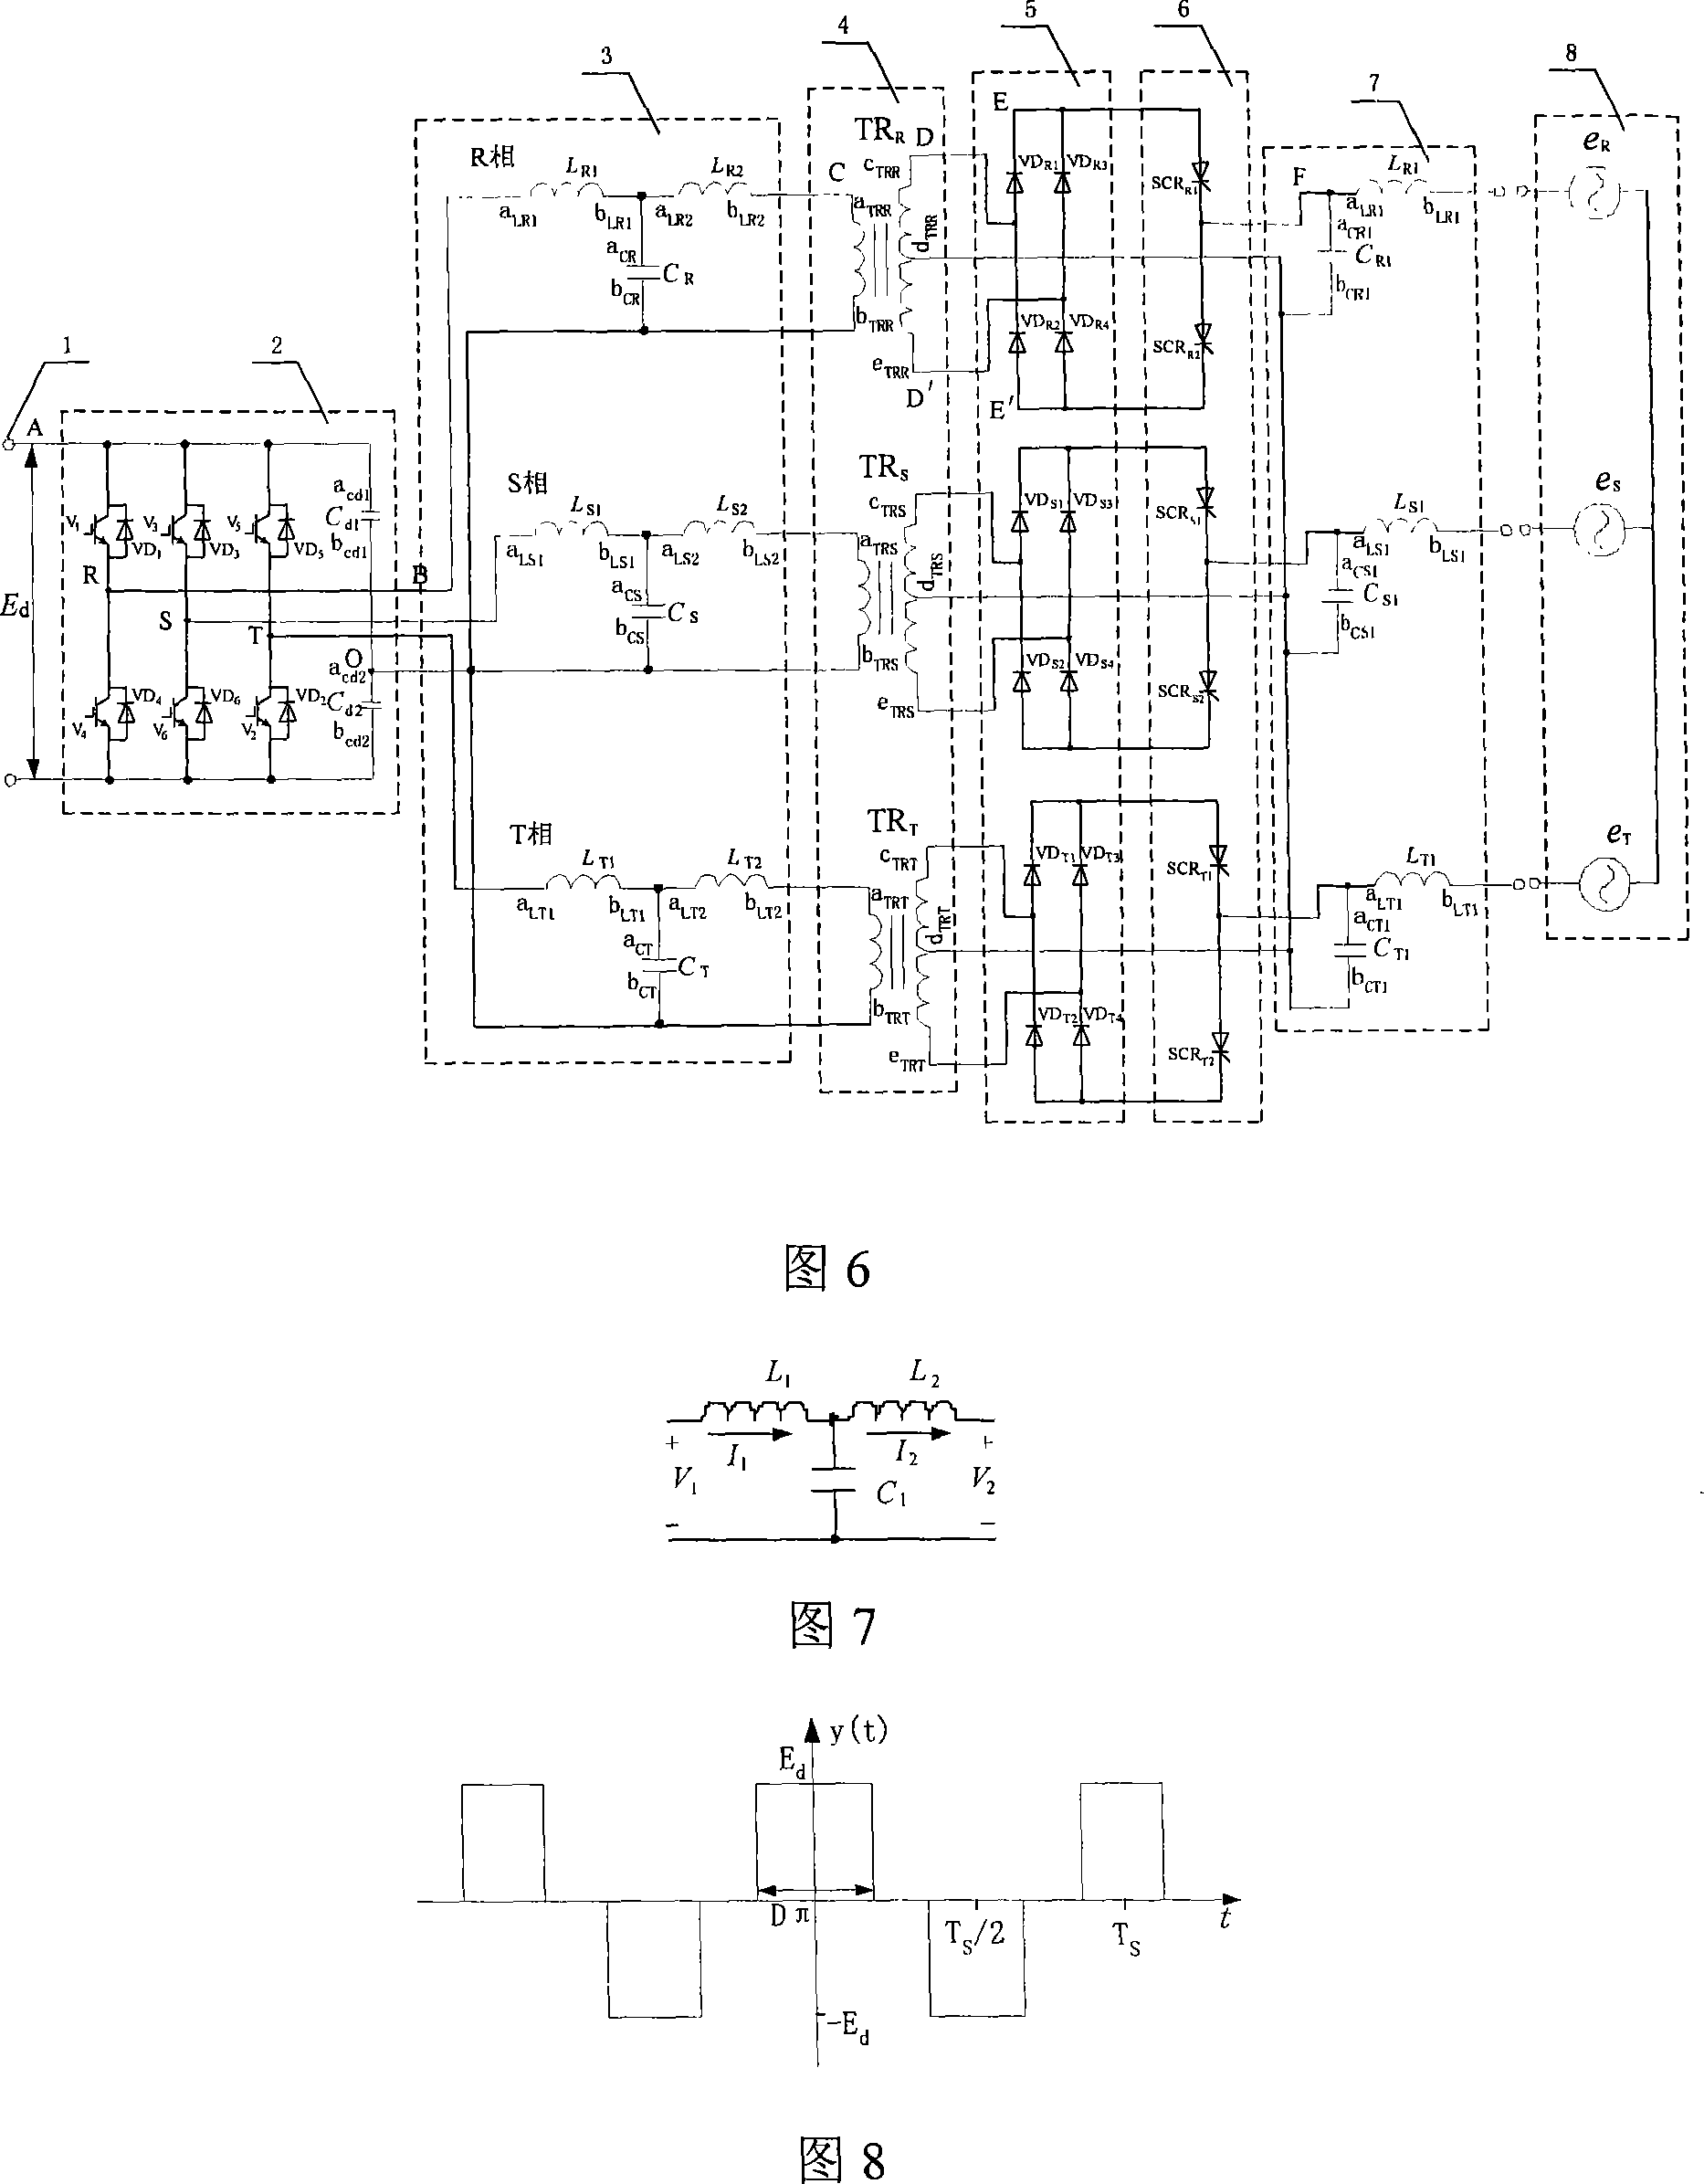 High-efficiency single-phase and three-phase grid-connected generating system